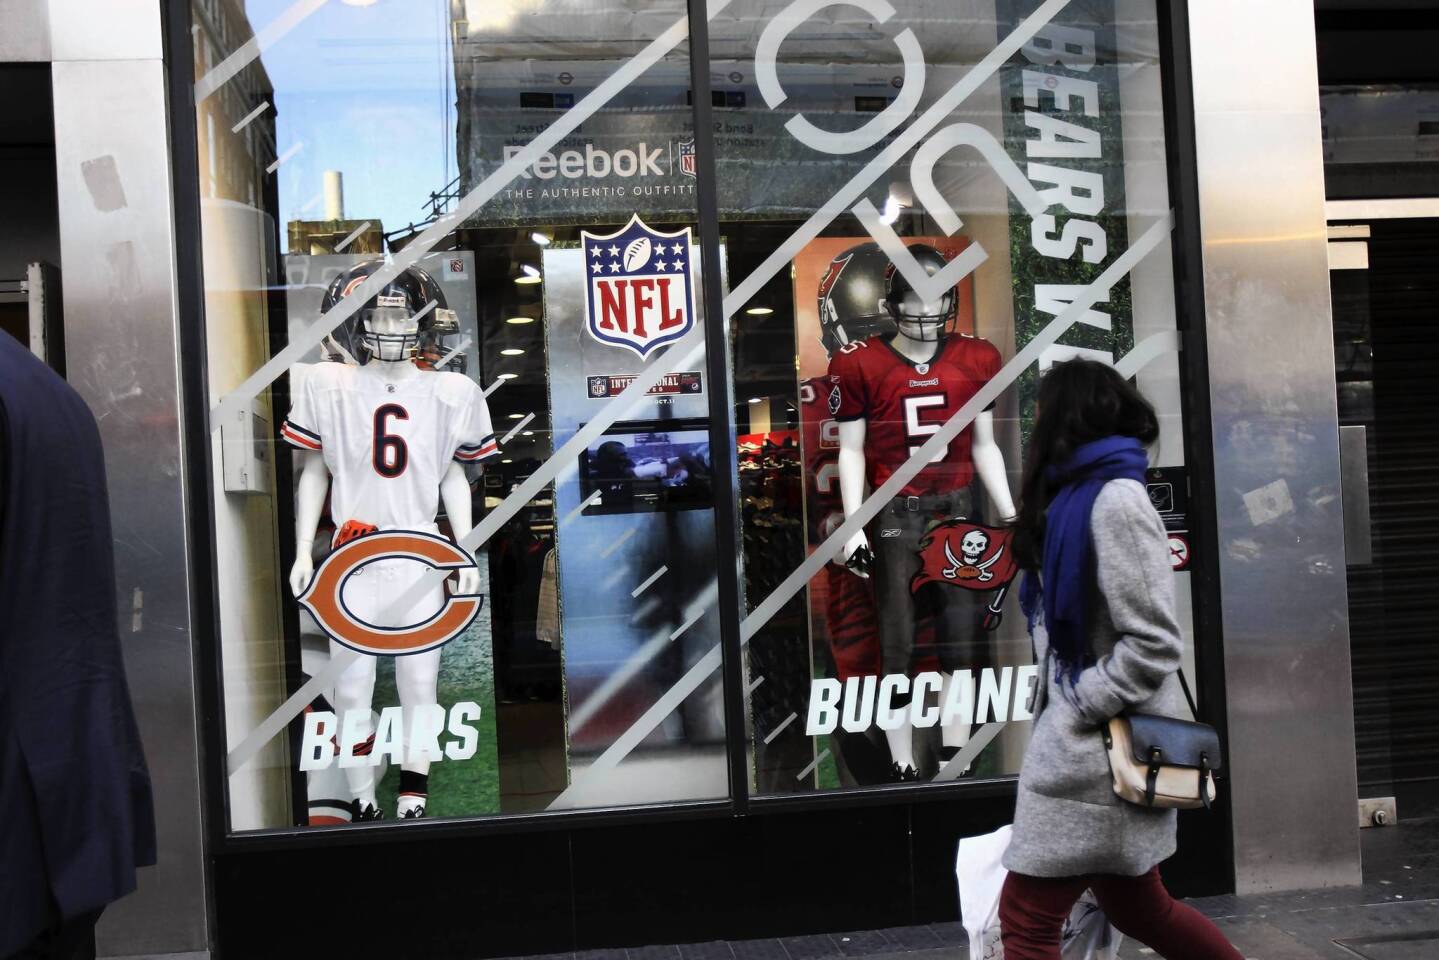 A window display in a Reebok store on Oxford Street hypes upcoming Chicago Bears' game against the Tampa Bay Buccaneers by showing highlights of the 1985 Super Bowl champs and Jay Cutler and Josh Freeman uniforms in London, England.